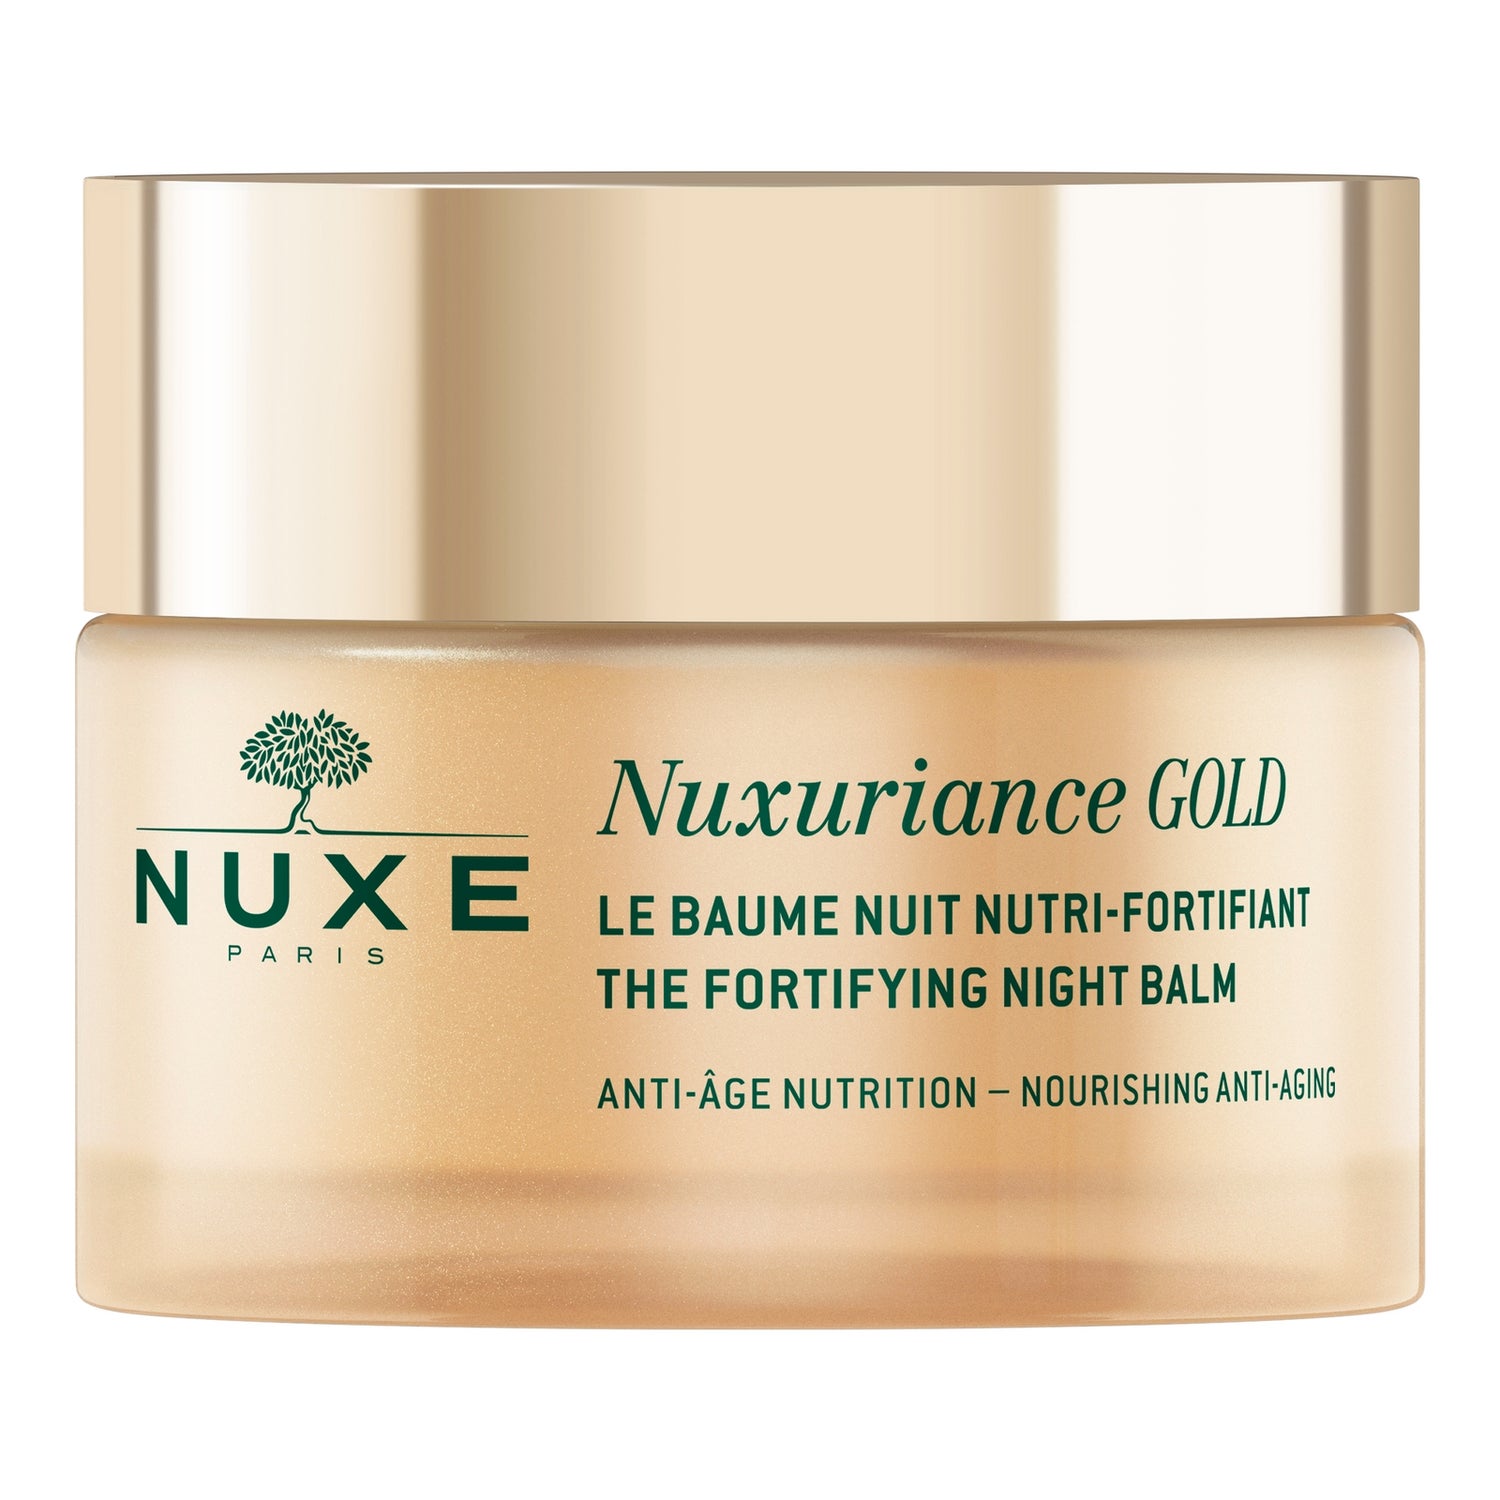 Baume Nuit Nutri-Fortifiant, Nuxuriance Gold 50 ml